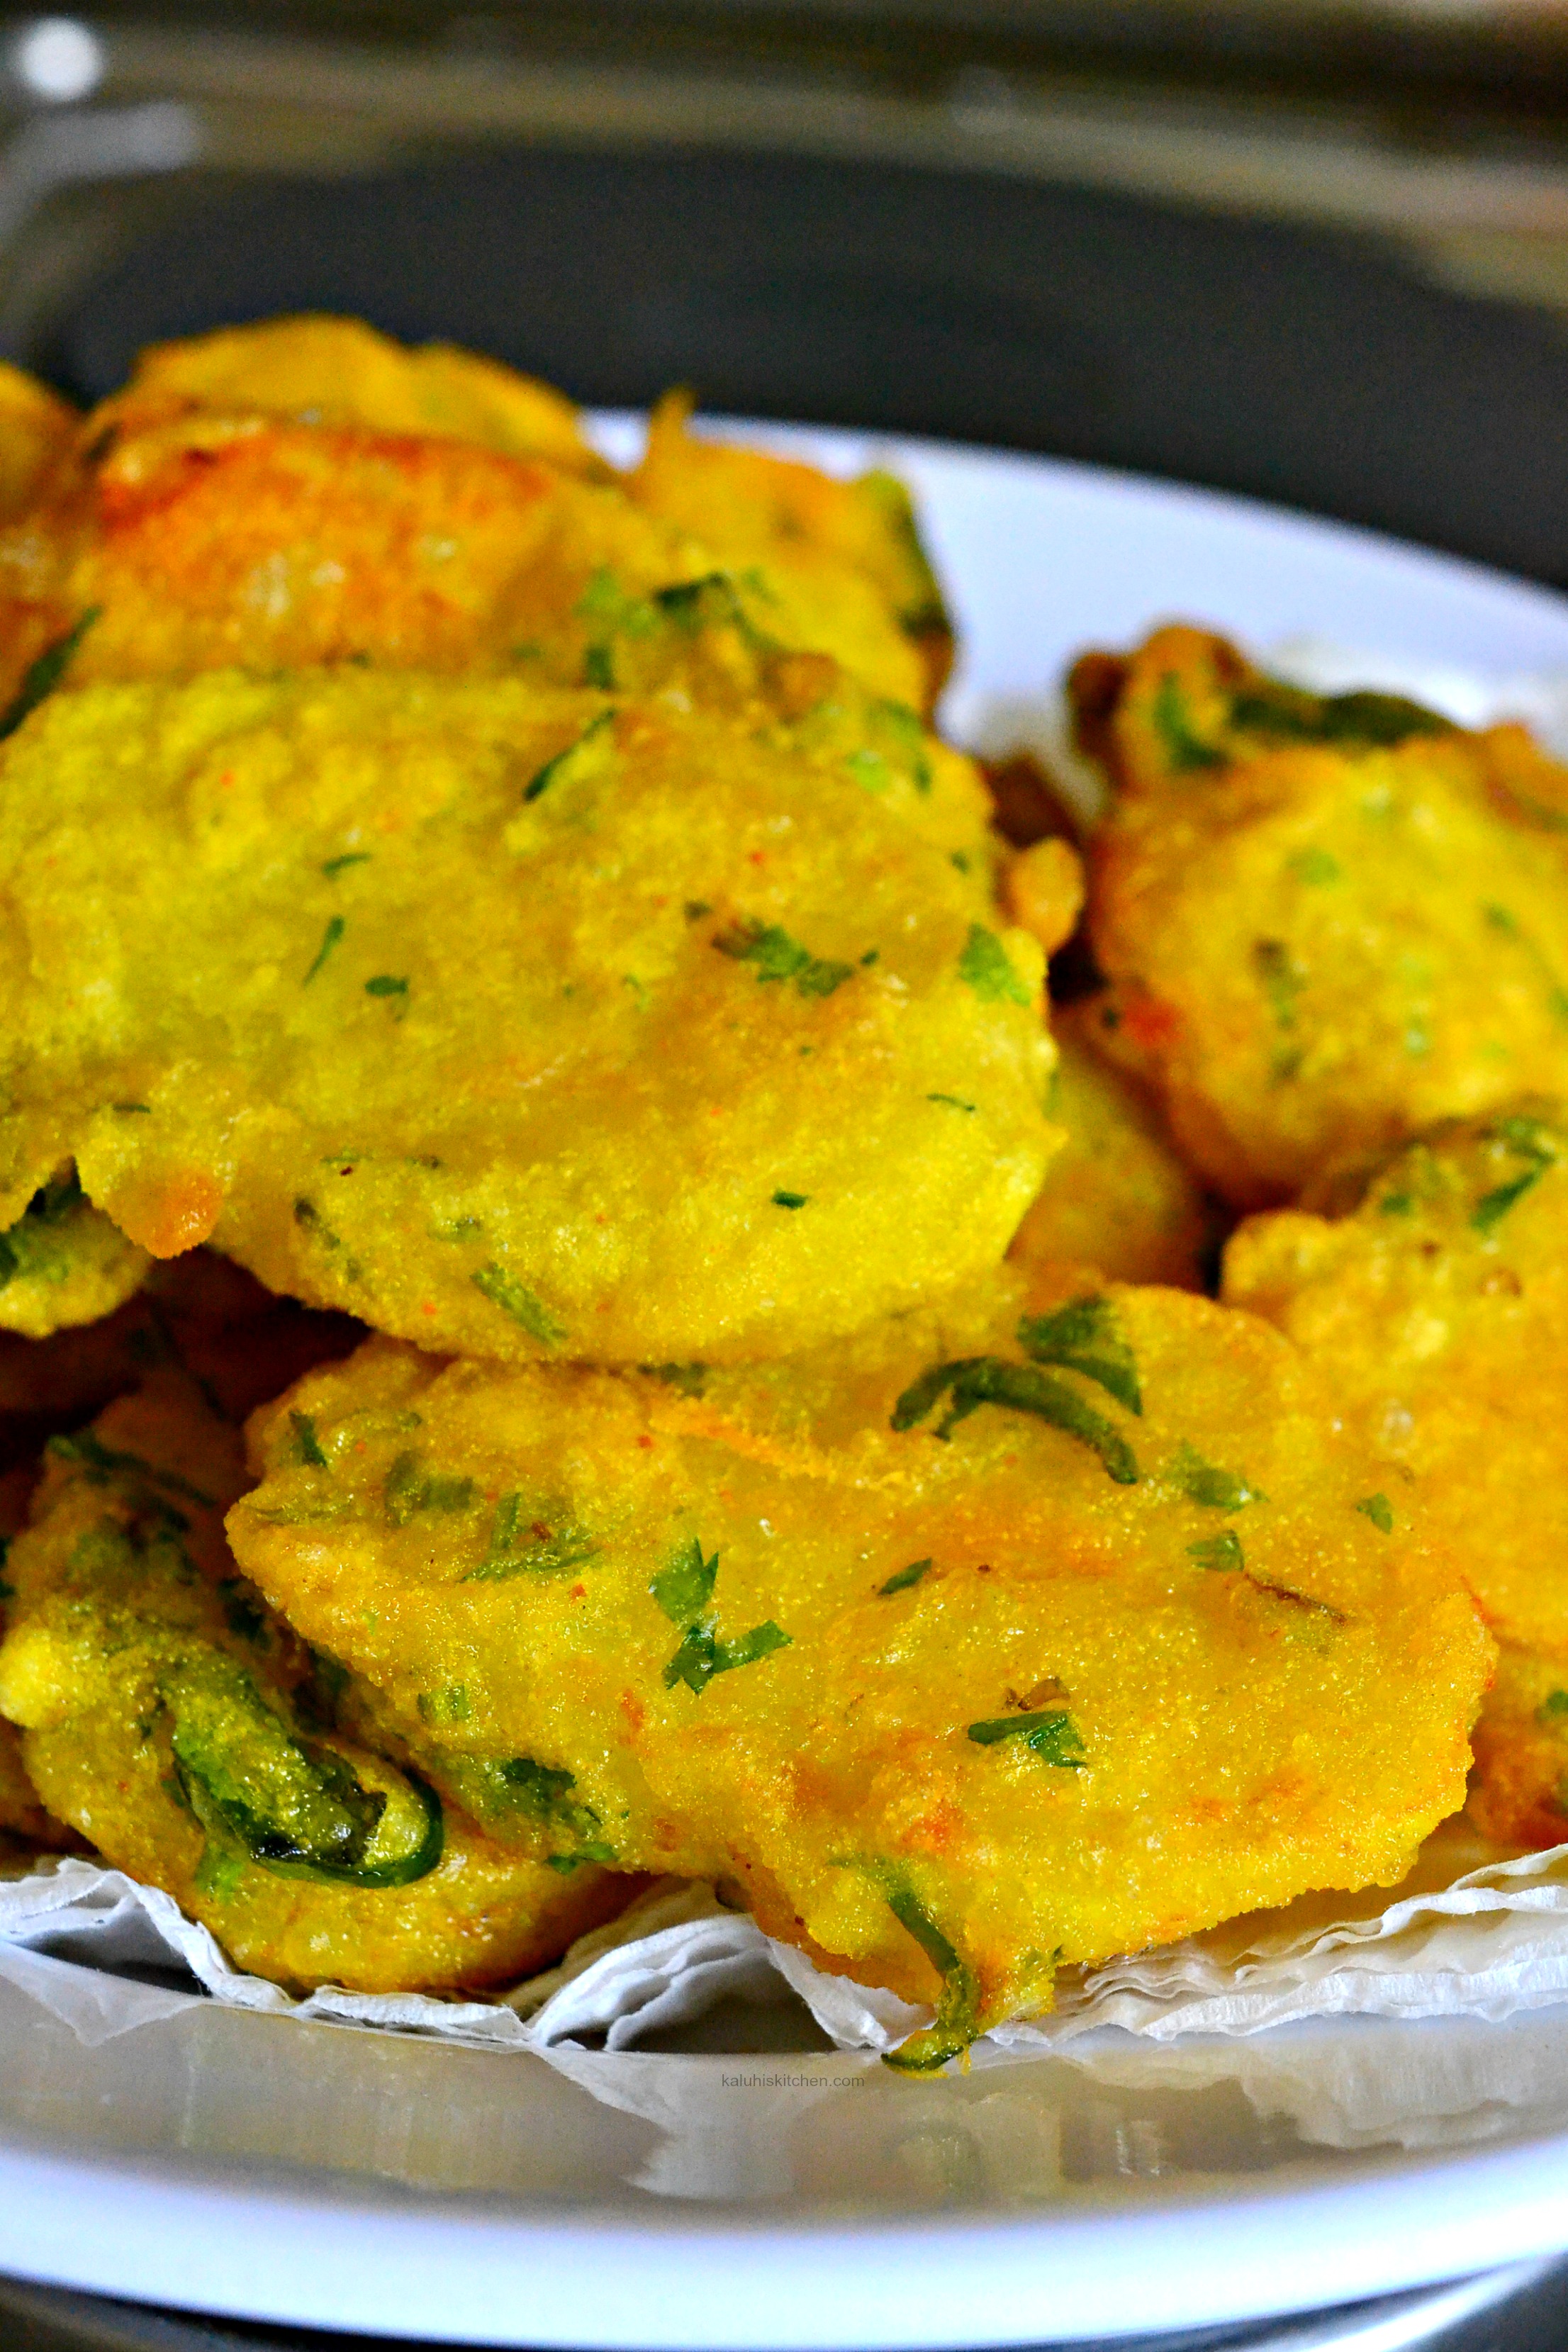 after-the-bhajia-are-done-cooking-set-them-aside-and-allow-excess-oil-to-drain-away_kaluhiskitchen-com